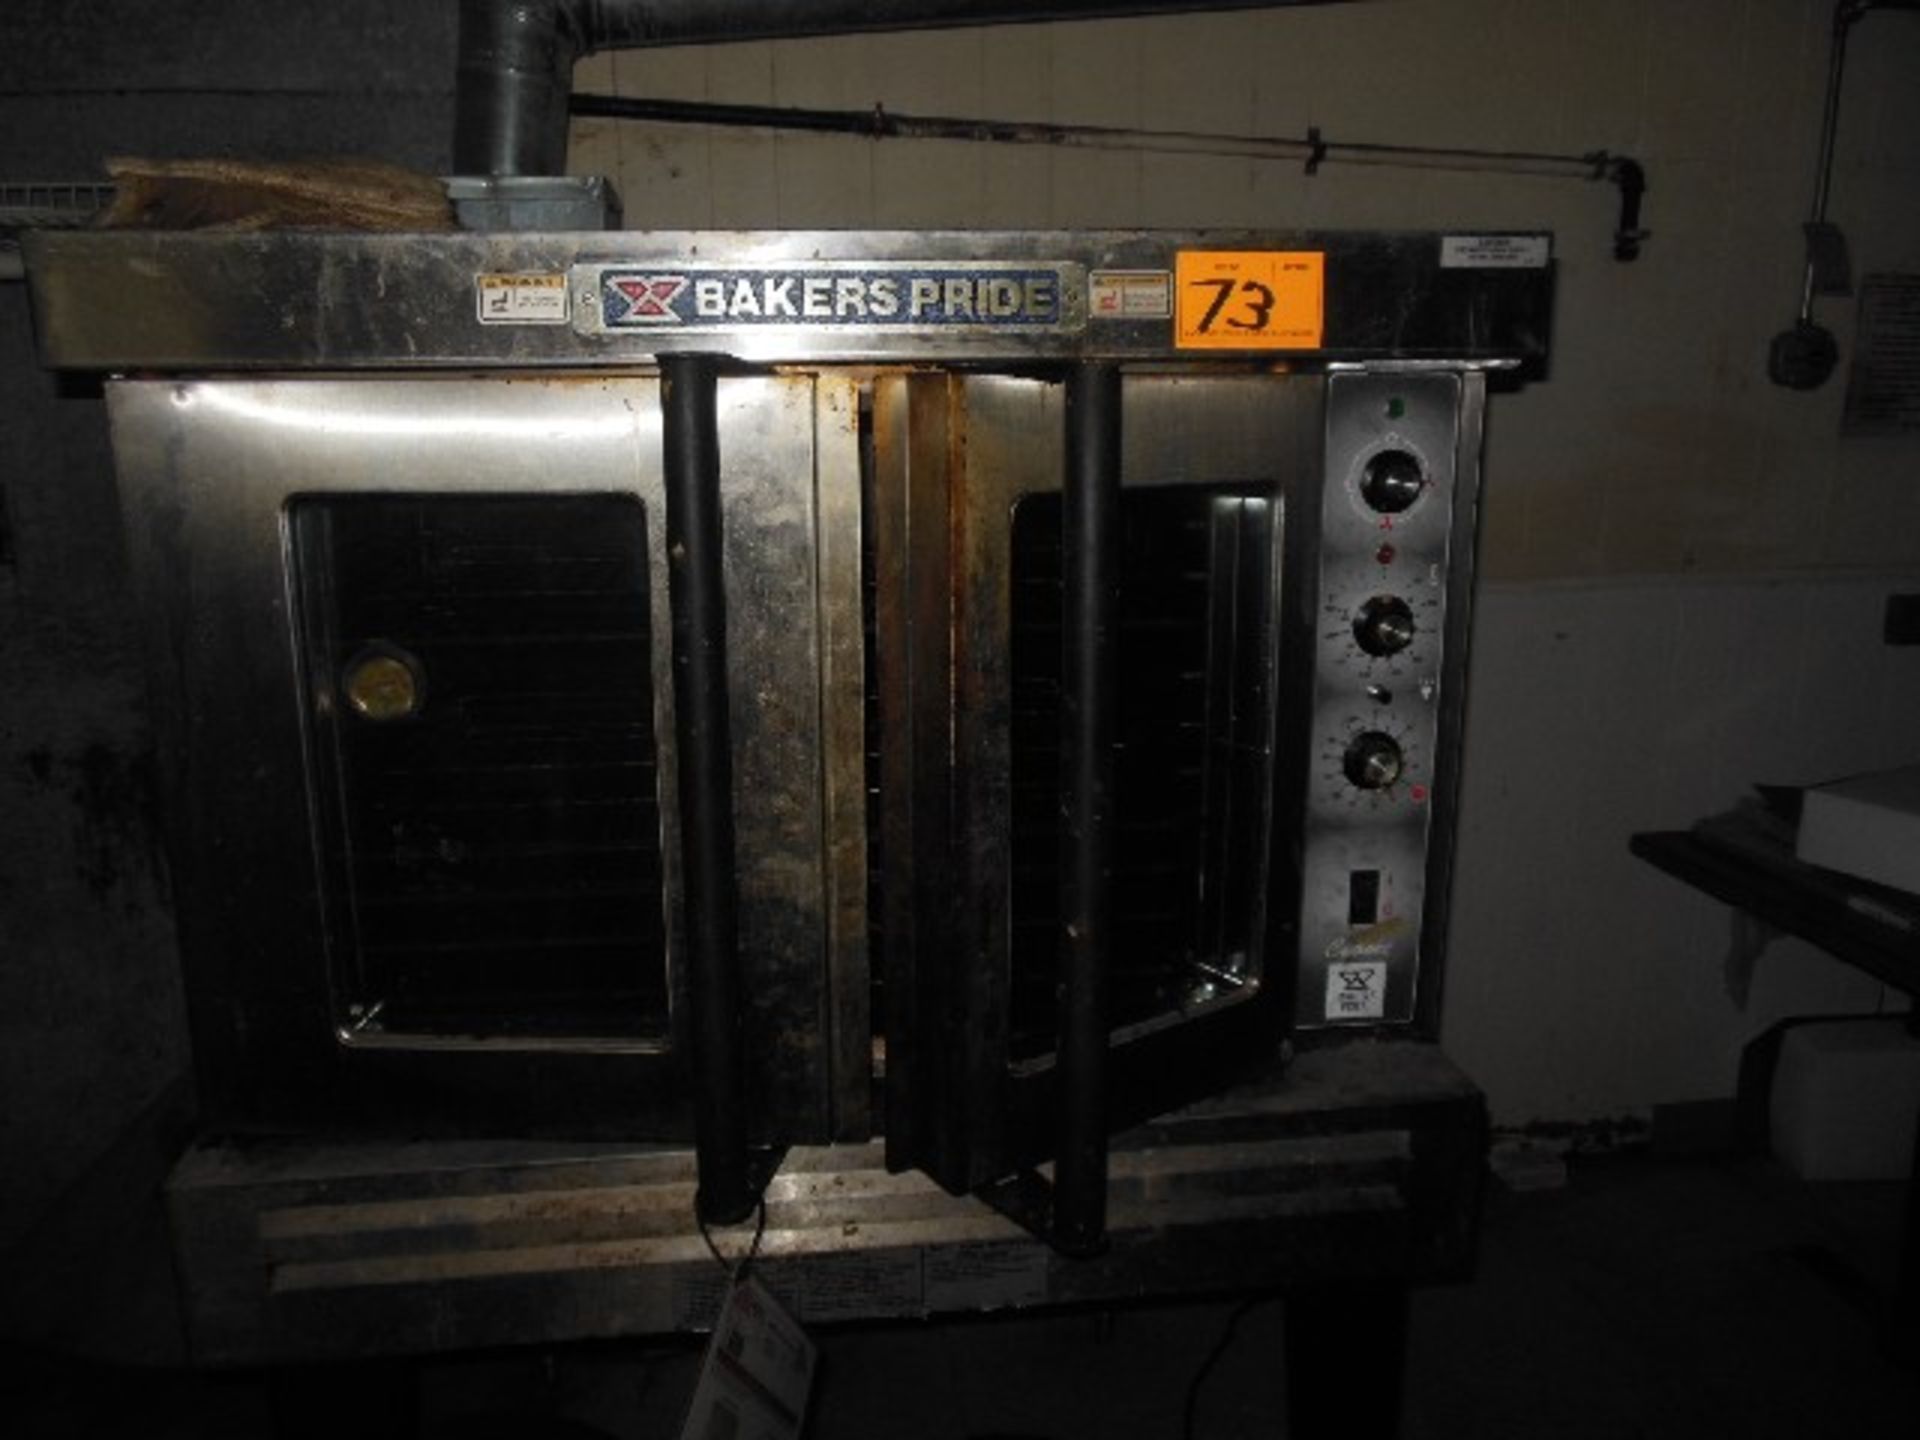 BAKERS PRIDE MODEL 455BC0GN-1 SINGLE DECK GAS CONVECTION OVEN, S/N 60339